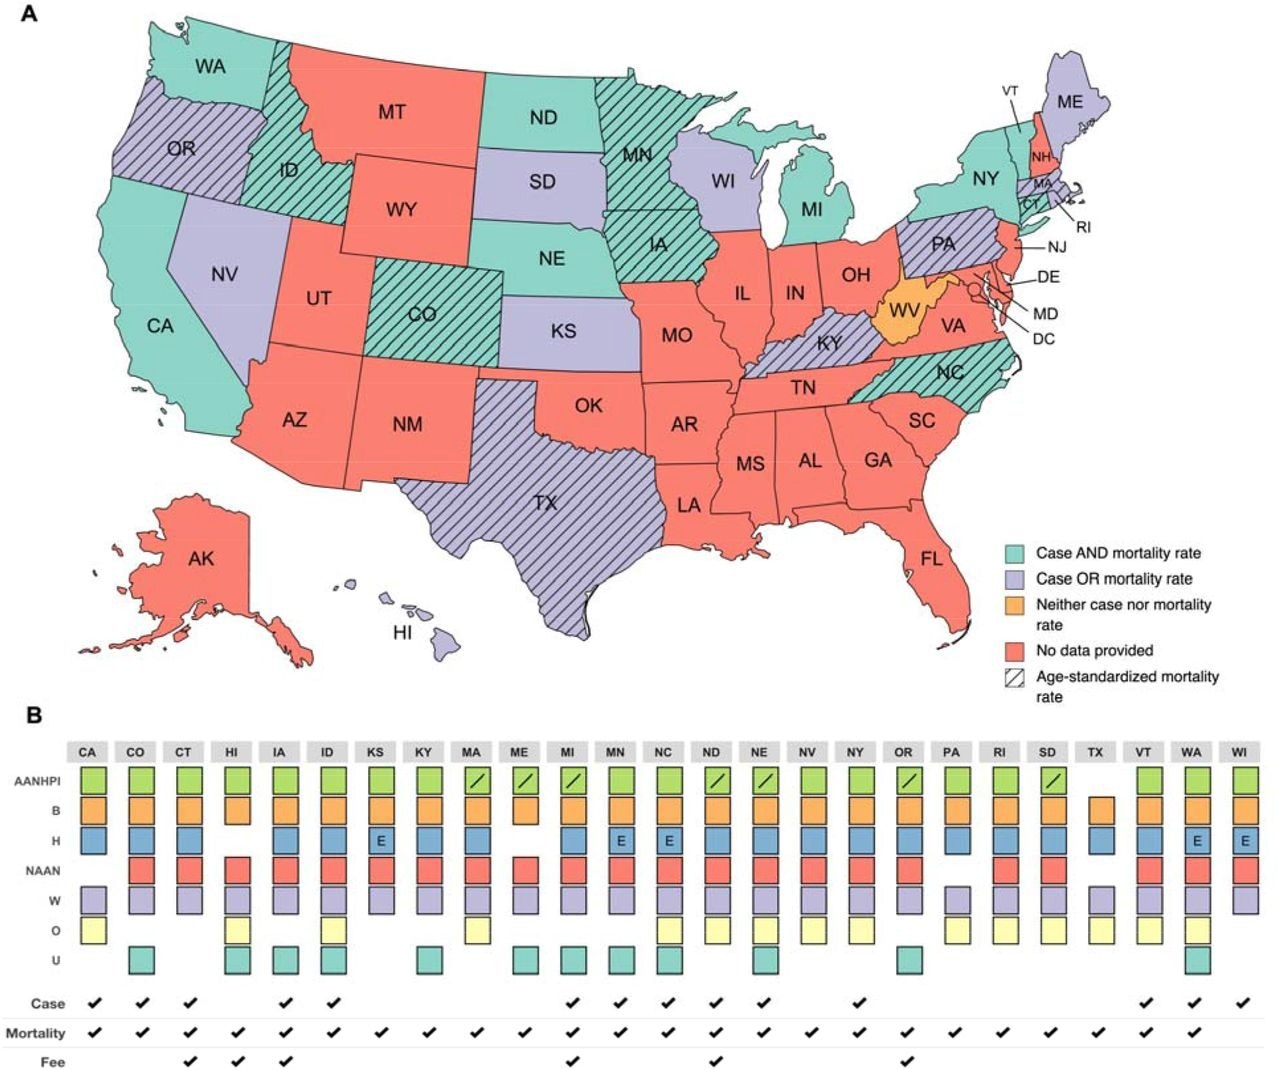 Data, Race, and Ethnicity Reporting from State DOCs Abbreviations: Asian American, Native Hawaiian, and Pacific Islander (AANHPI), Black (B), Hispanic (H), Native American and Alaskan Native (NAAN), White (W), Other (O), and Unknown (U) (Top) States sending at least partial data are displayed. Figure displays whether each state provided data sufficient to calculate case and mortality rates, case or mortality rates, neither case nor mortality rates, age-standardized mortality rates, or no data at all. States that sent 3/01/2021 custody population, 10/01/2021 case and mortality data by race/ethnicity (all RE groups for case data; White, Black, Hispanic, at minimum for mortality data) were considered having sent all data for case and mortality rate calculations. States that additionally sent mortality data by age are indicated as having sent all data necessary for calculating age-standardized mortality rates. (Bottom) Displays the data sets and racial/ethnic categories reported by each state. States that requested fees are also indicated. States that sent SARS-CoV-2 case (“Case”) and/or mortality data (“Mortality”) by race/ethnicity are marked. Forward slash denotes states that reported Asian American, Native Hawaiian, and Pacific Islander in disaggregated racial categories. “E” denotes states reporting “Hispanic” as an ethnicity rather than a race category.